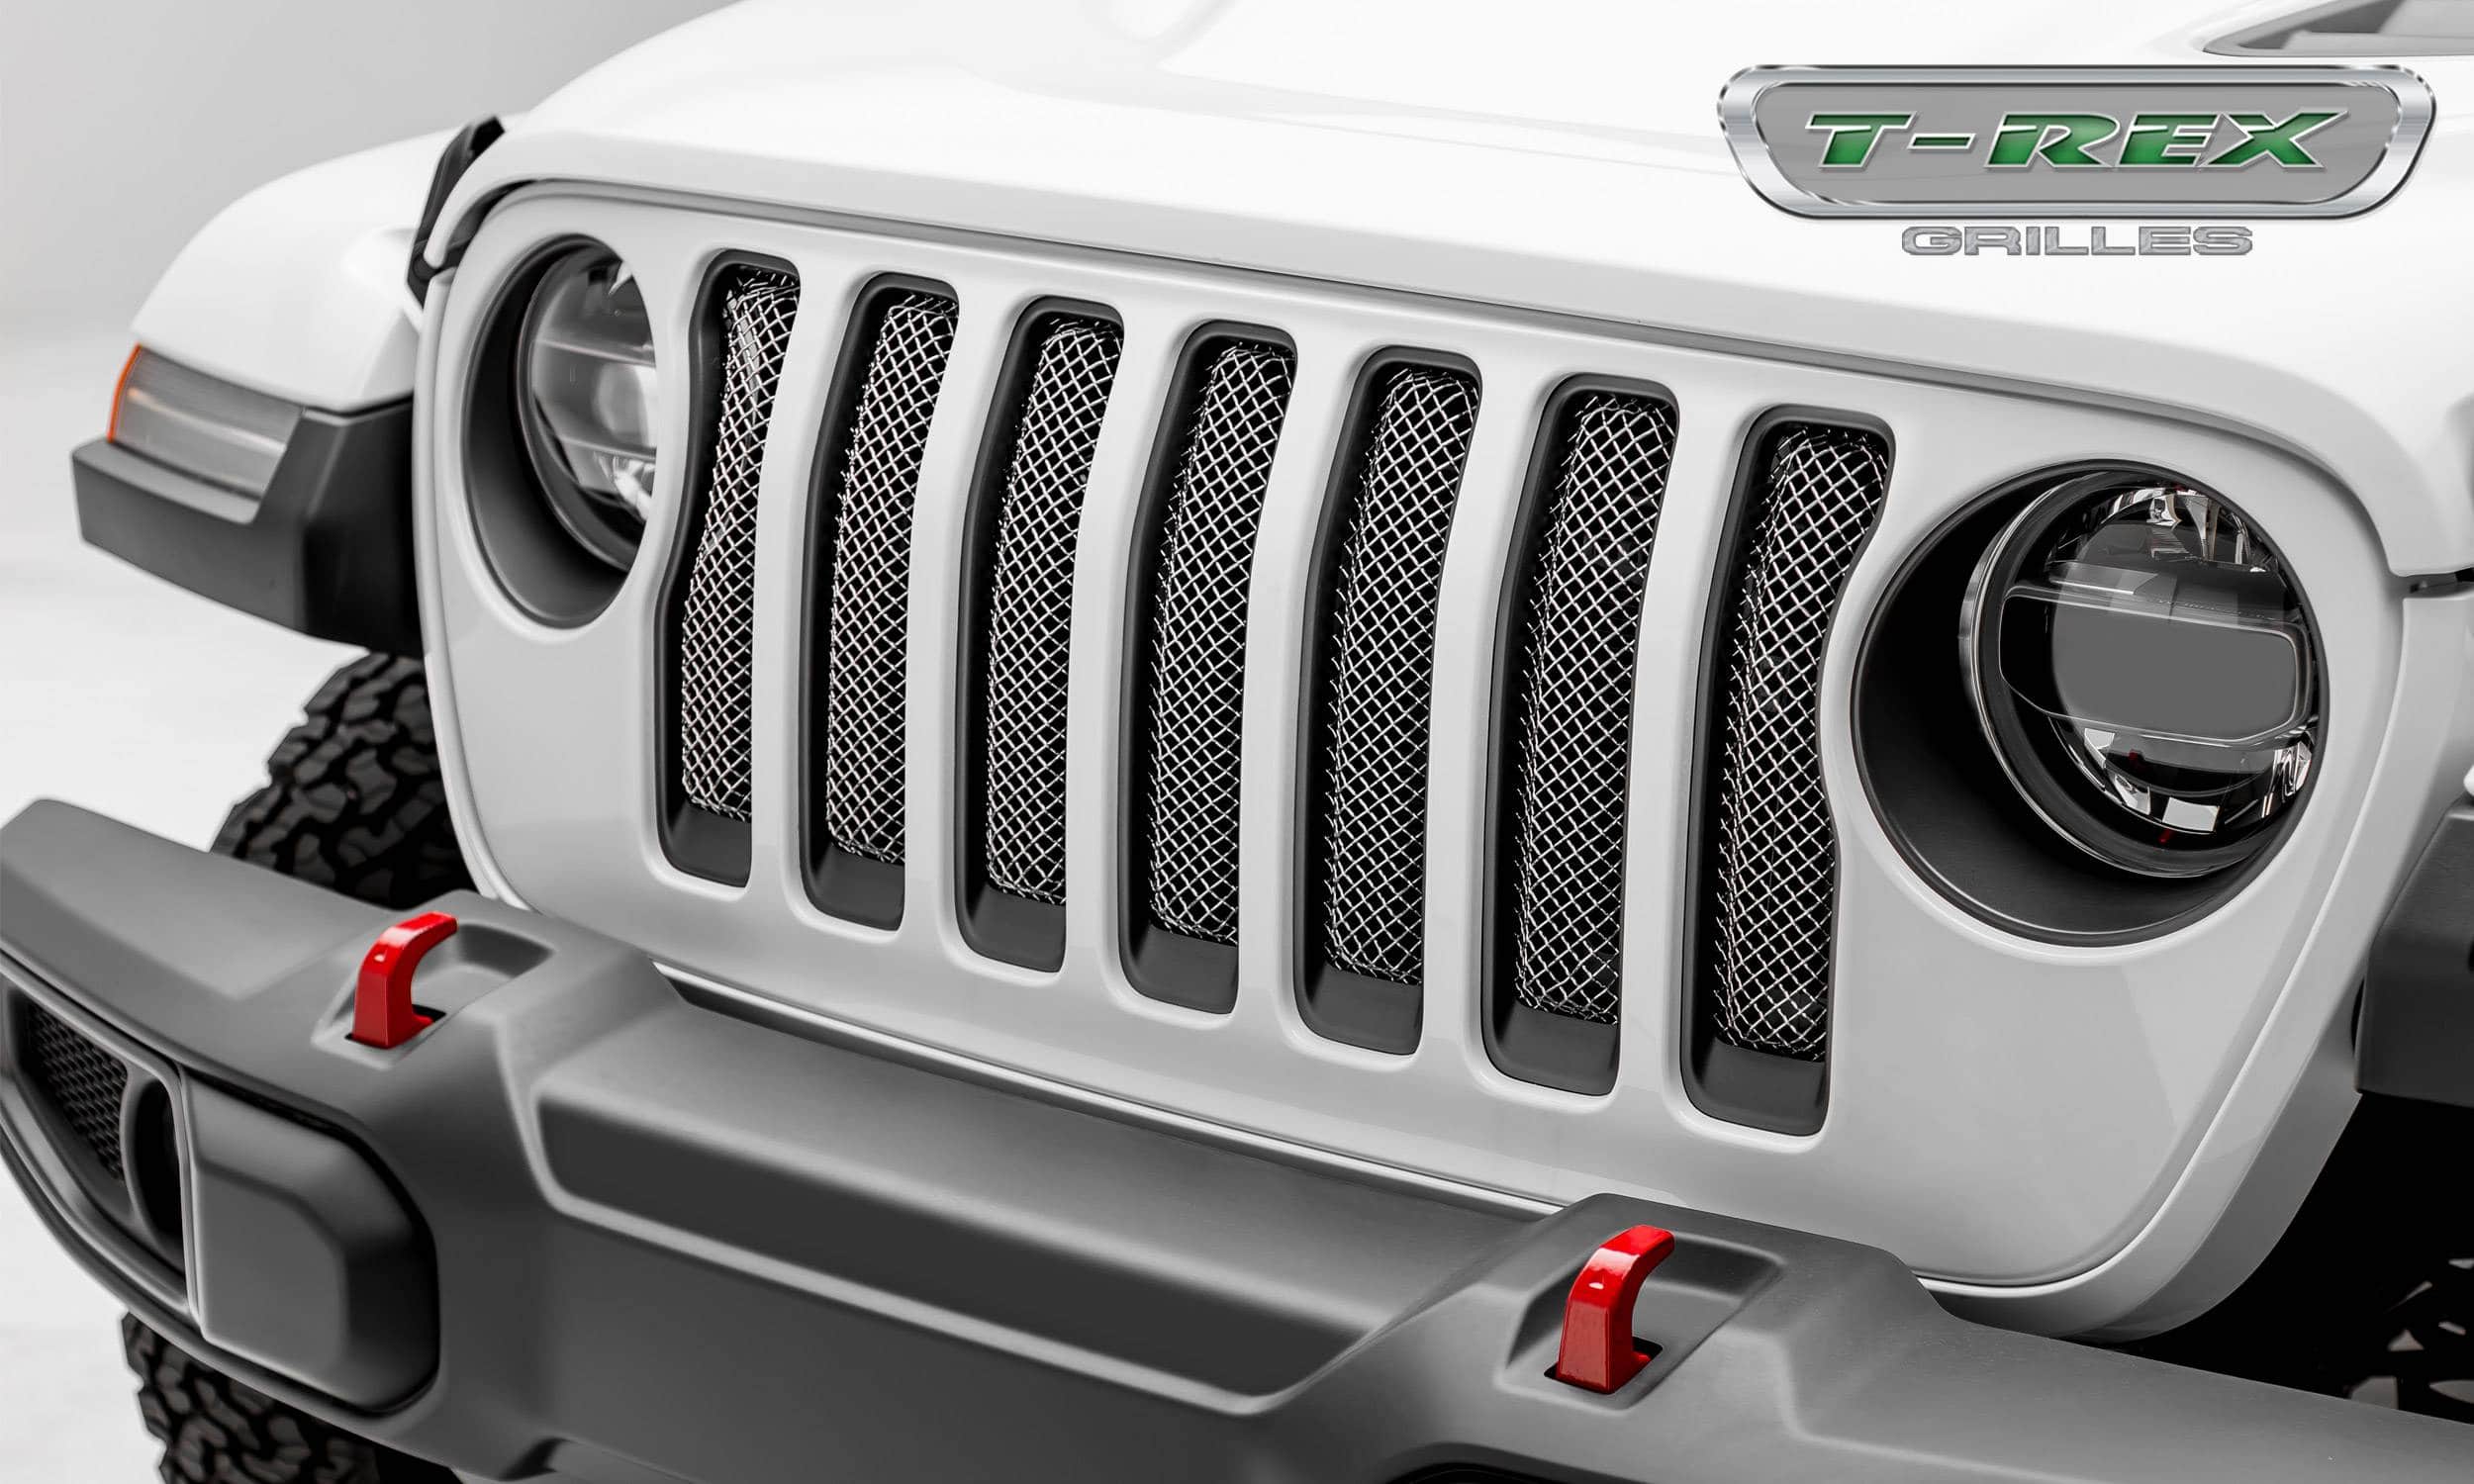 Jeep Wrangler JL - Sport Series - Formed Mesh Grille - Installs behind  factory grille - Polished - Mr. Kustom Auto Accessories and Customizing